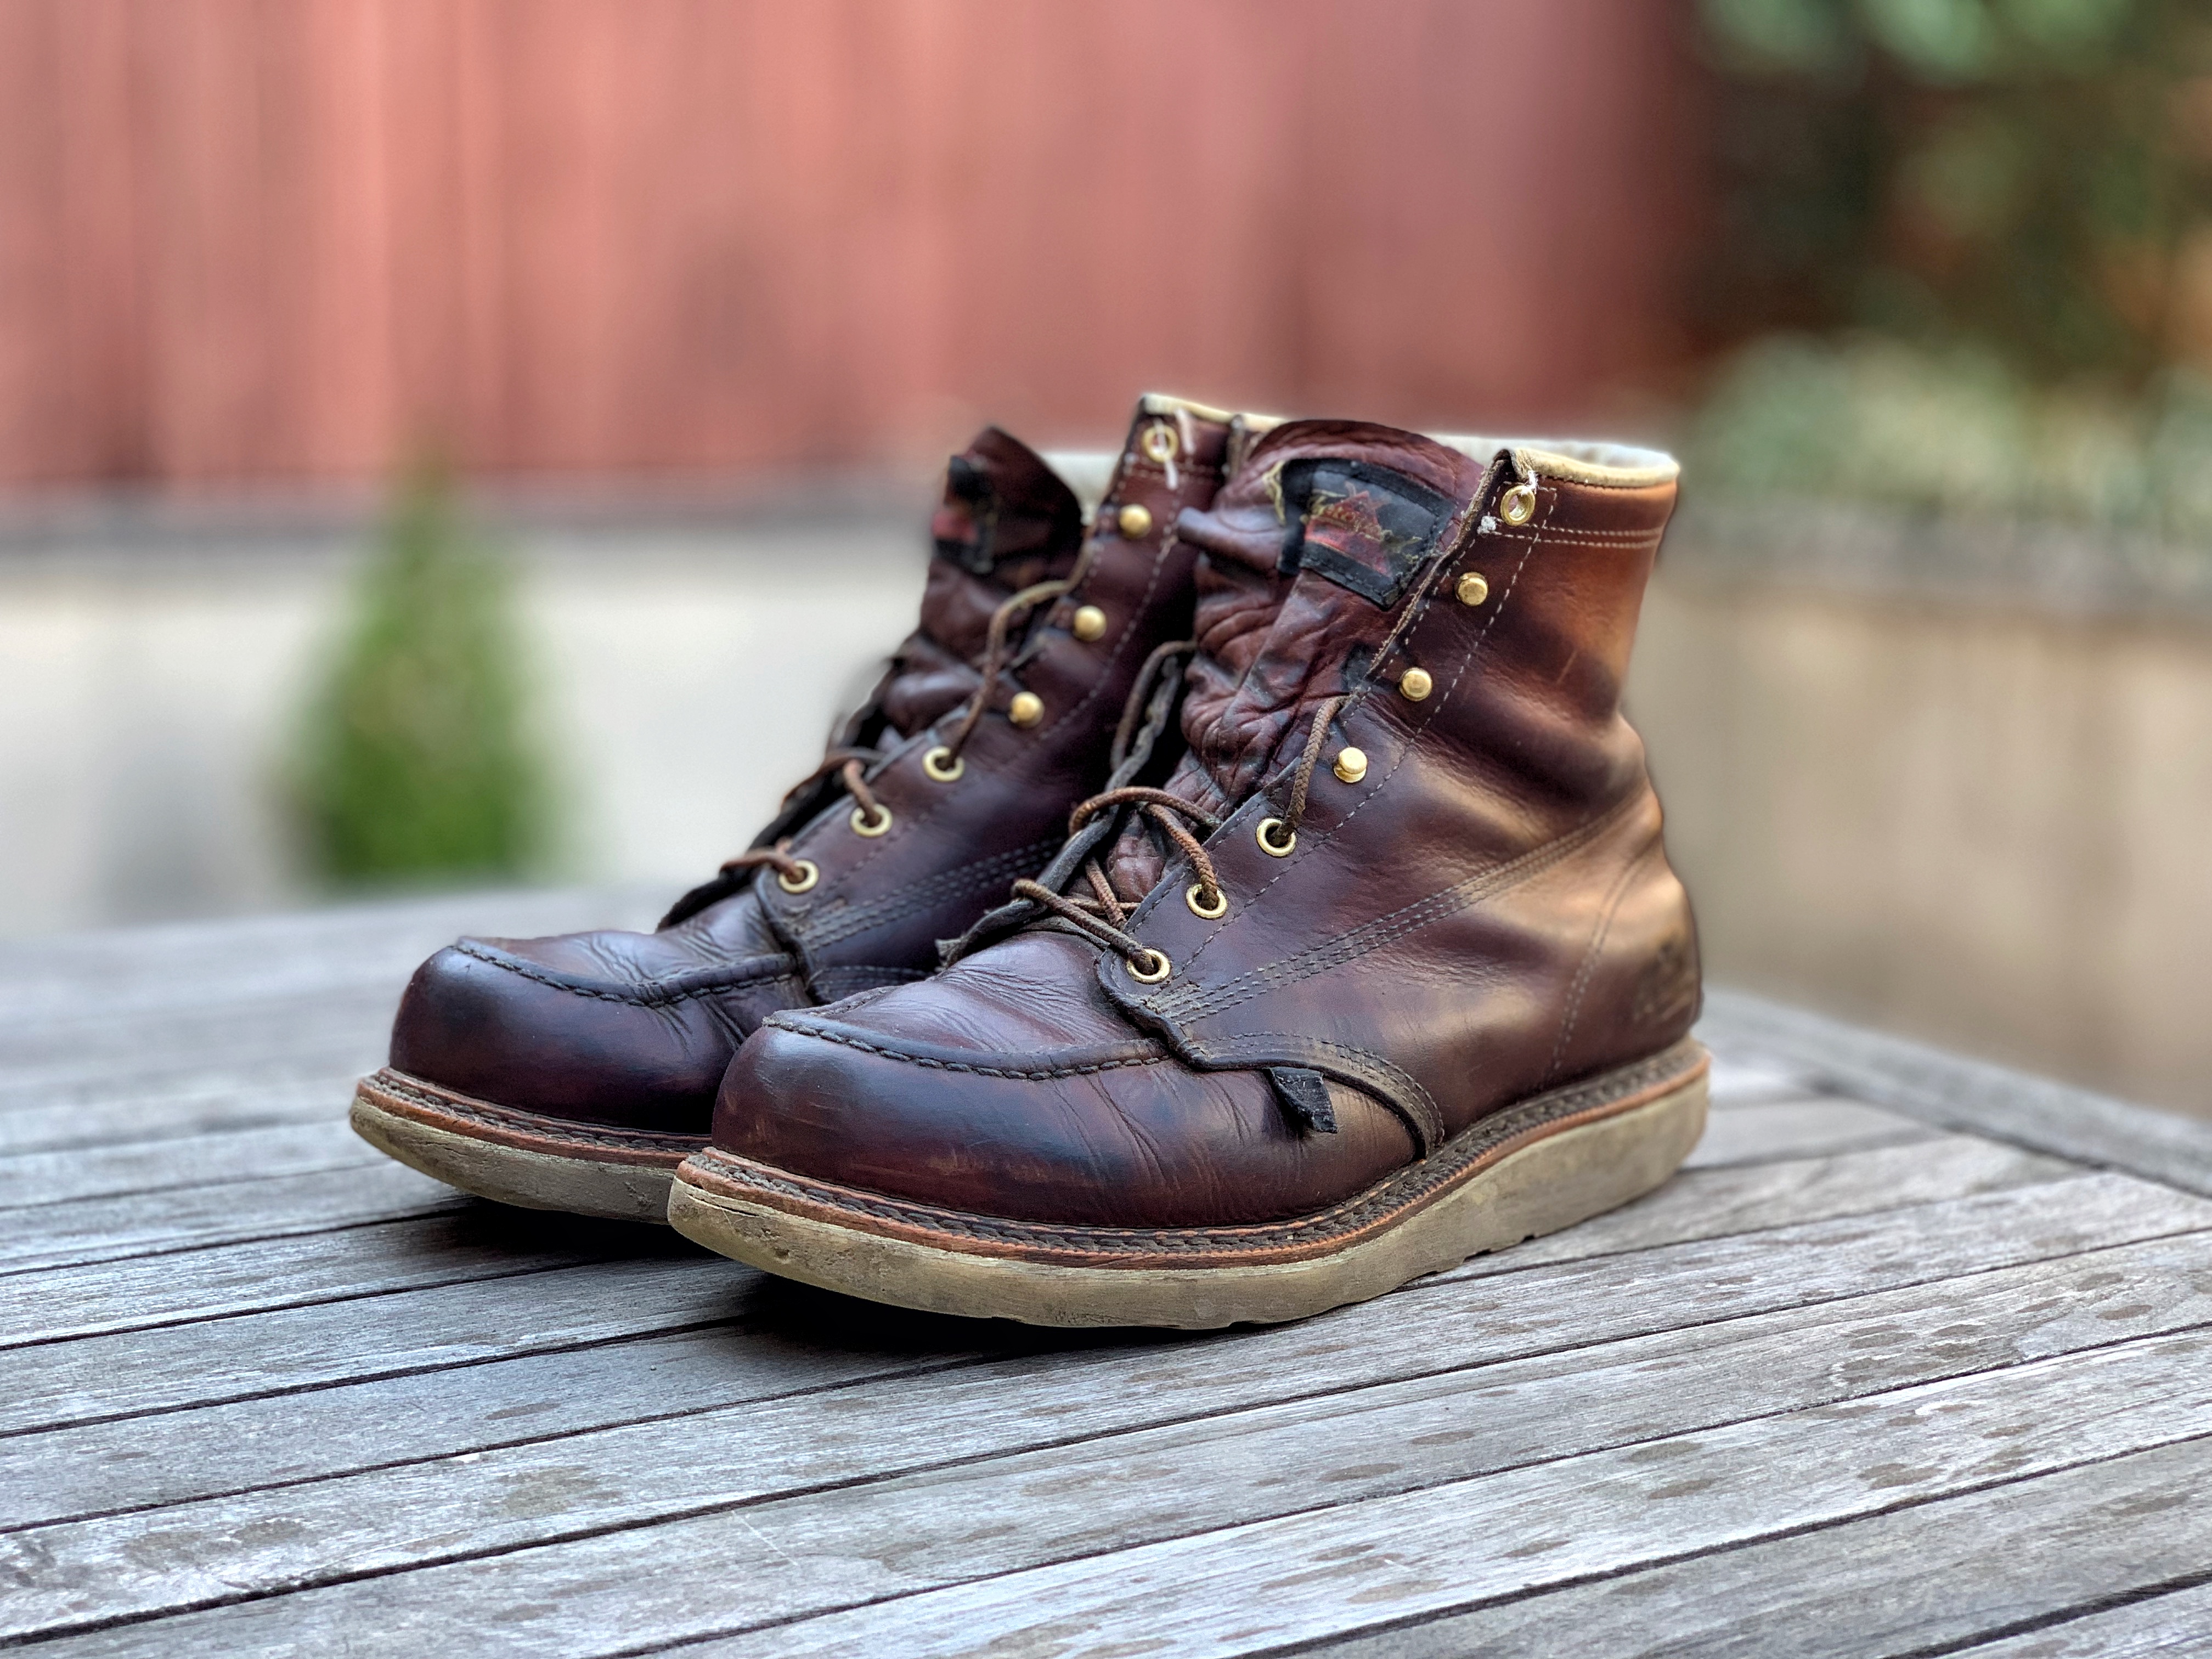 thorogood boots sold near me